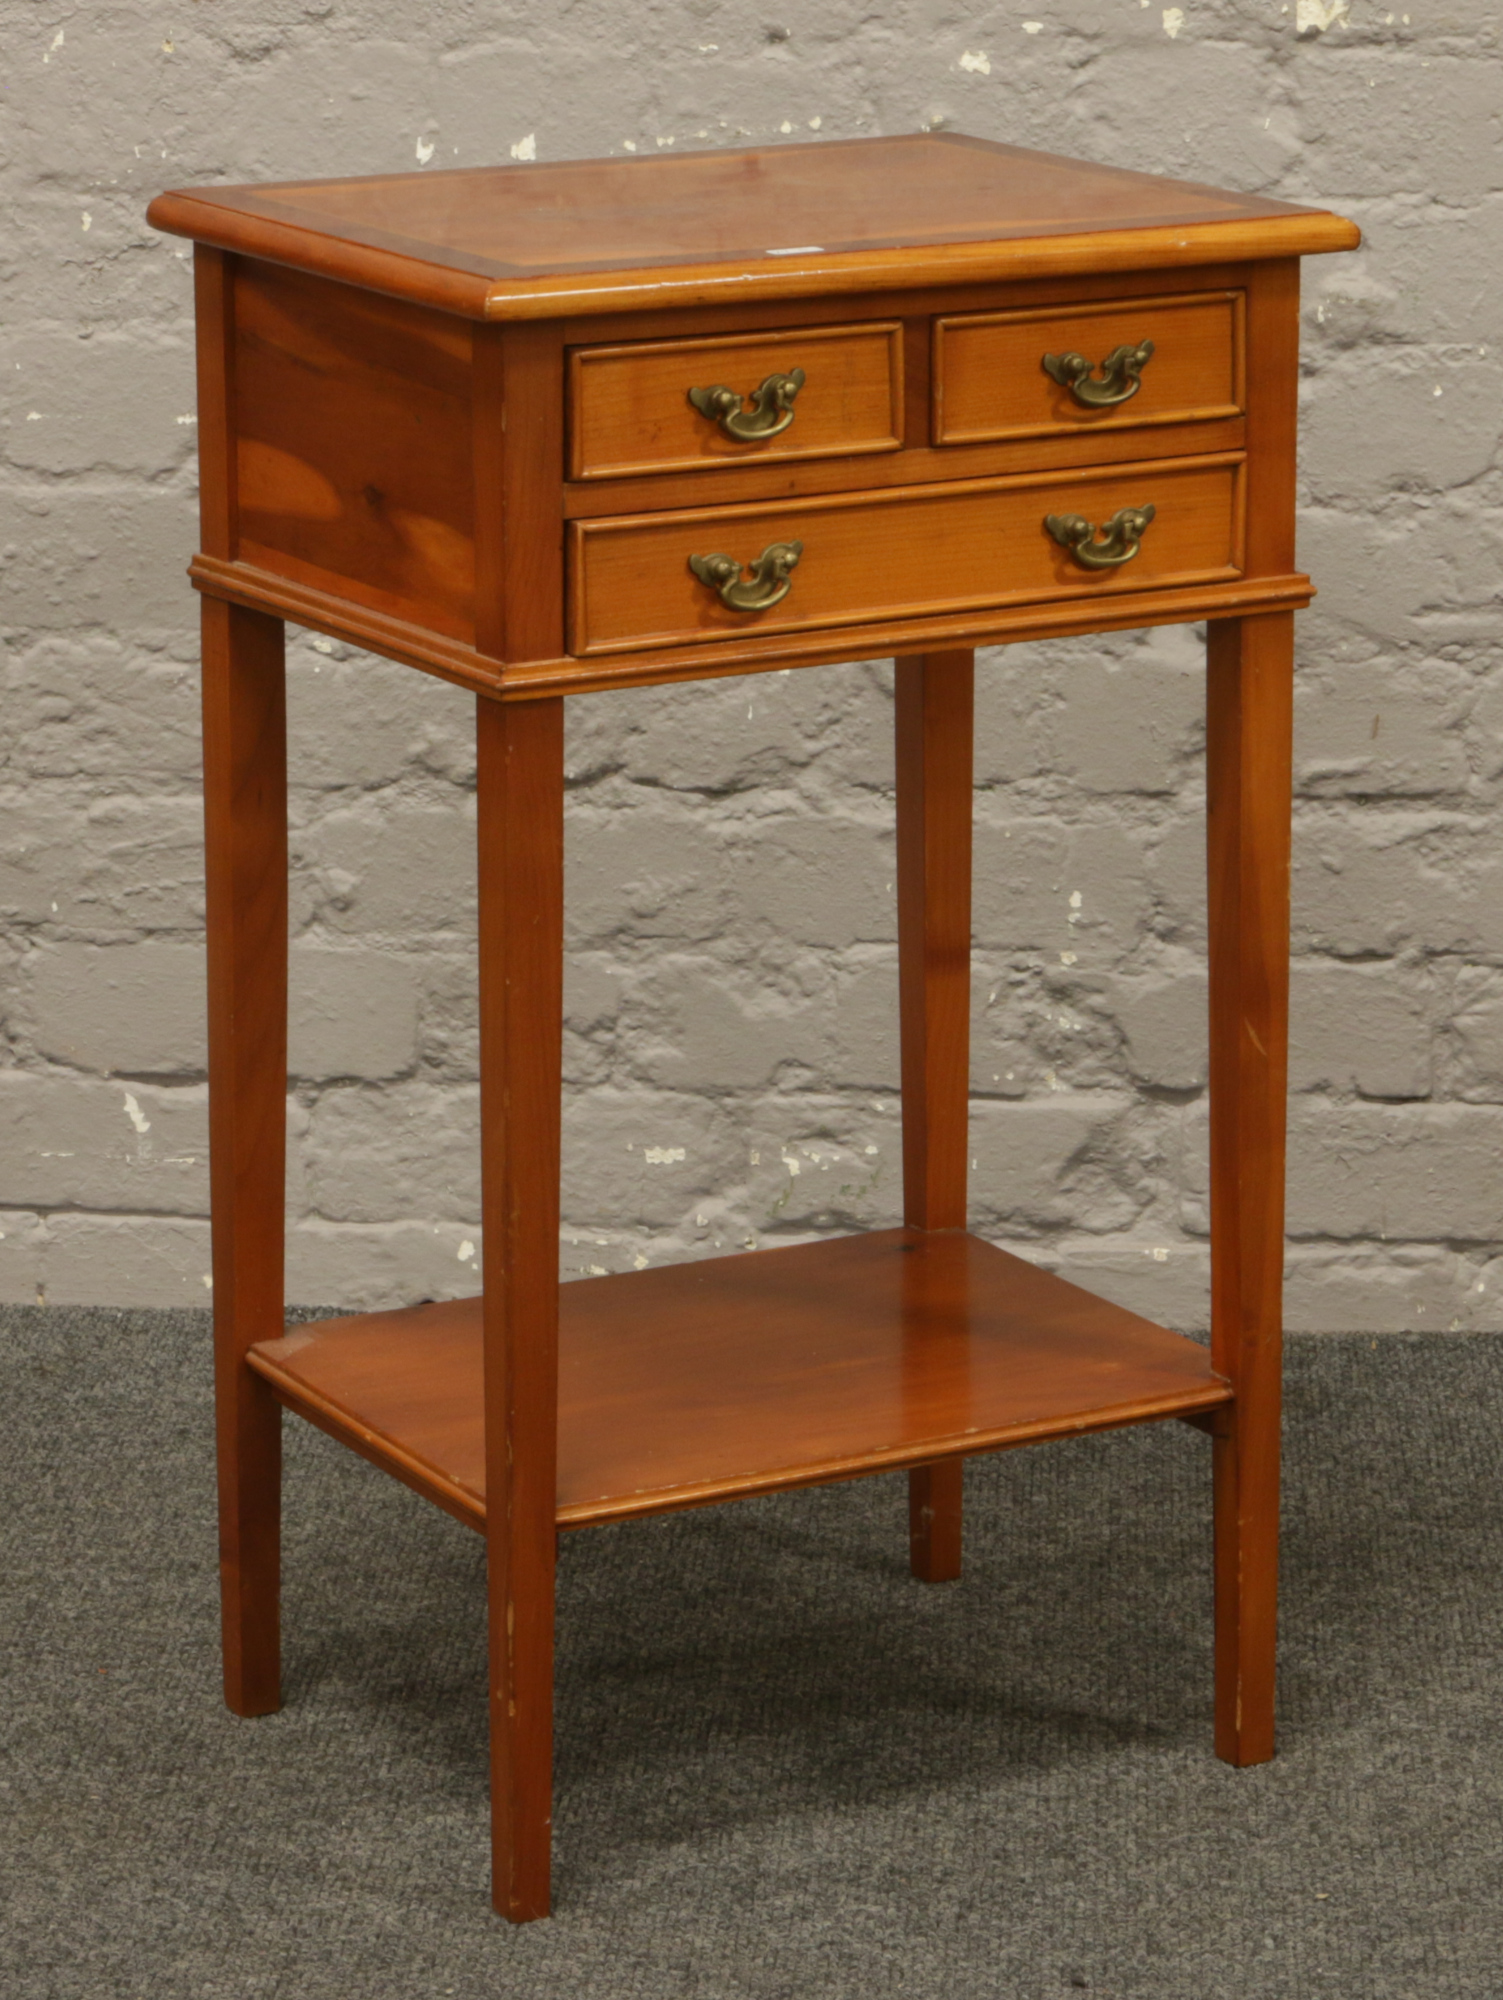 A two tone yew wood three drawer chest raised on square tapering legs.